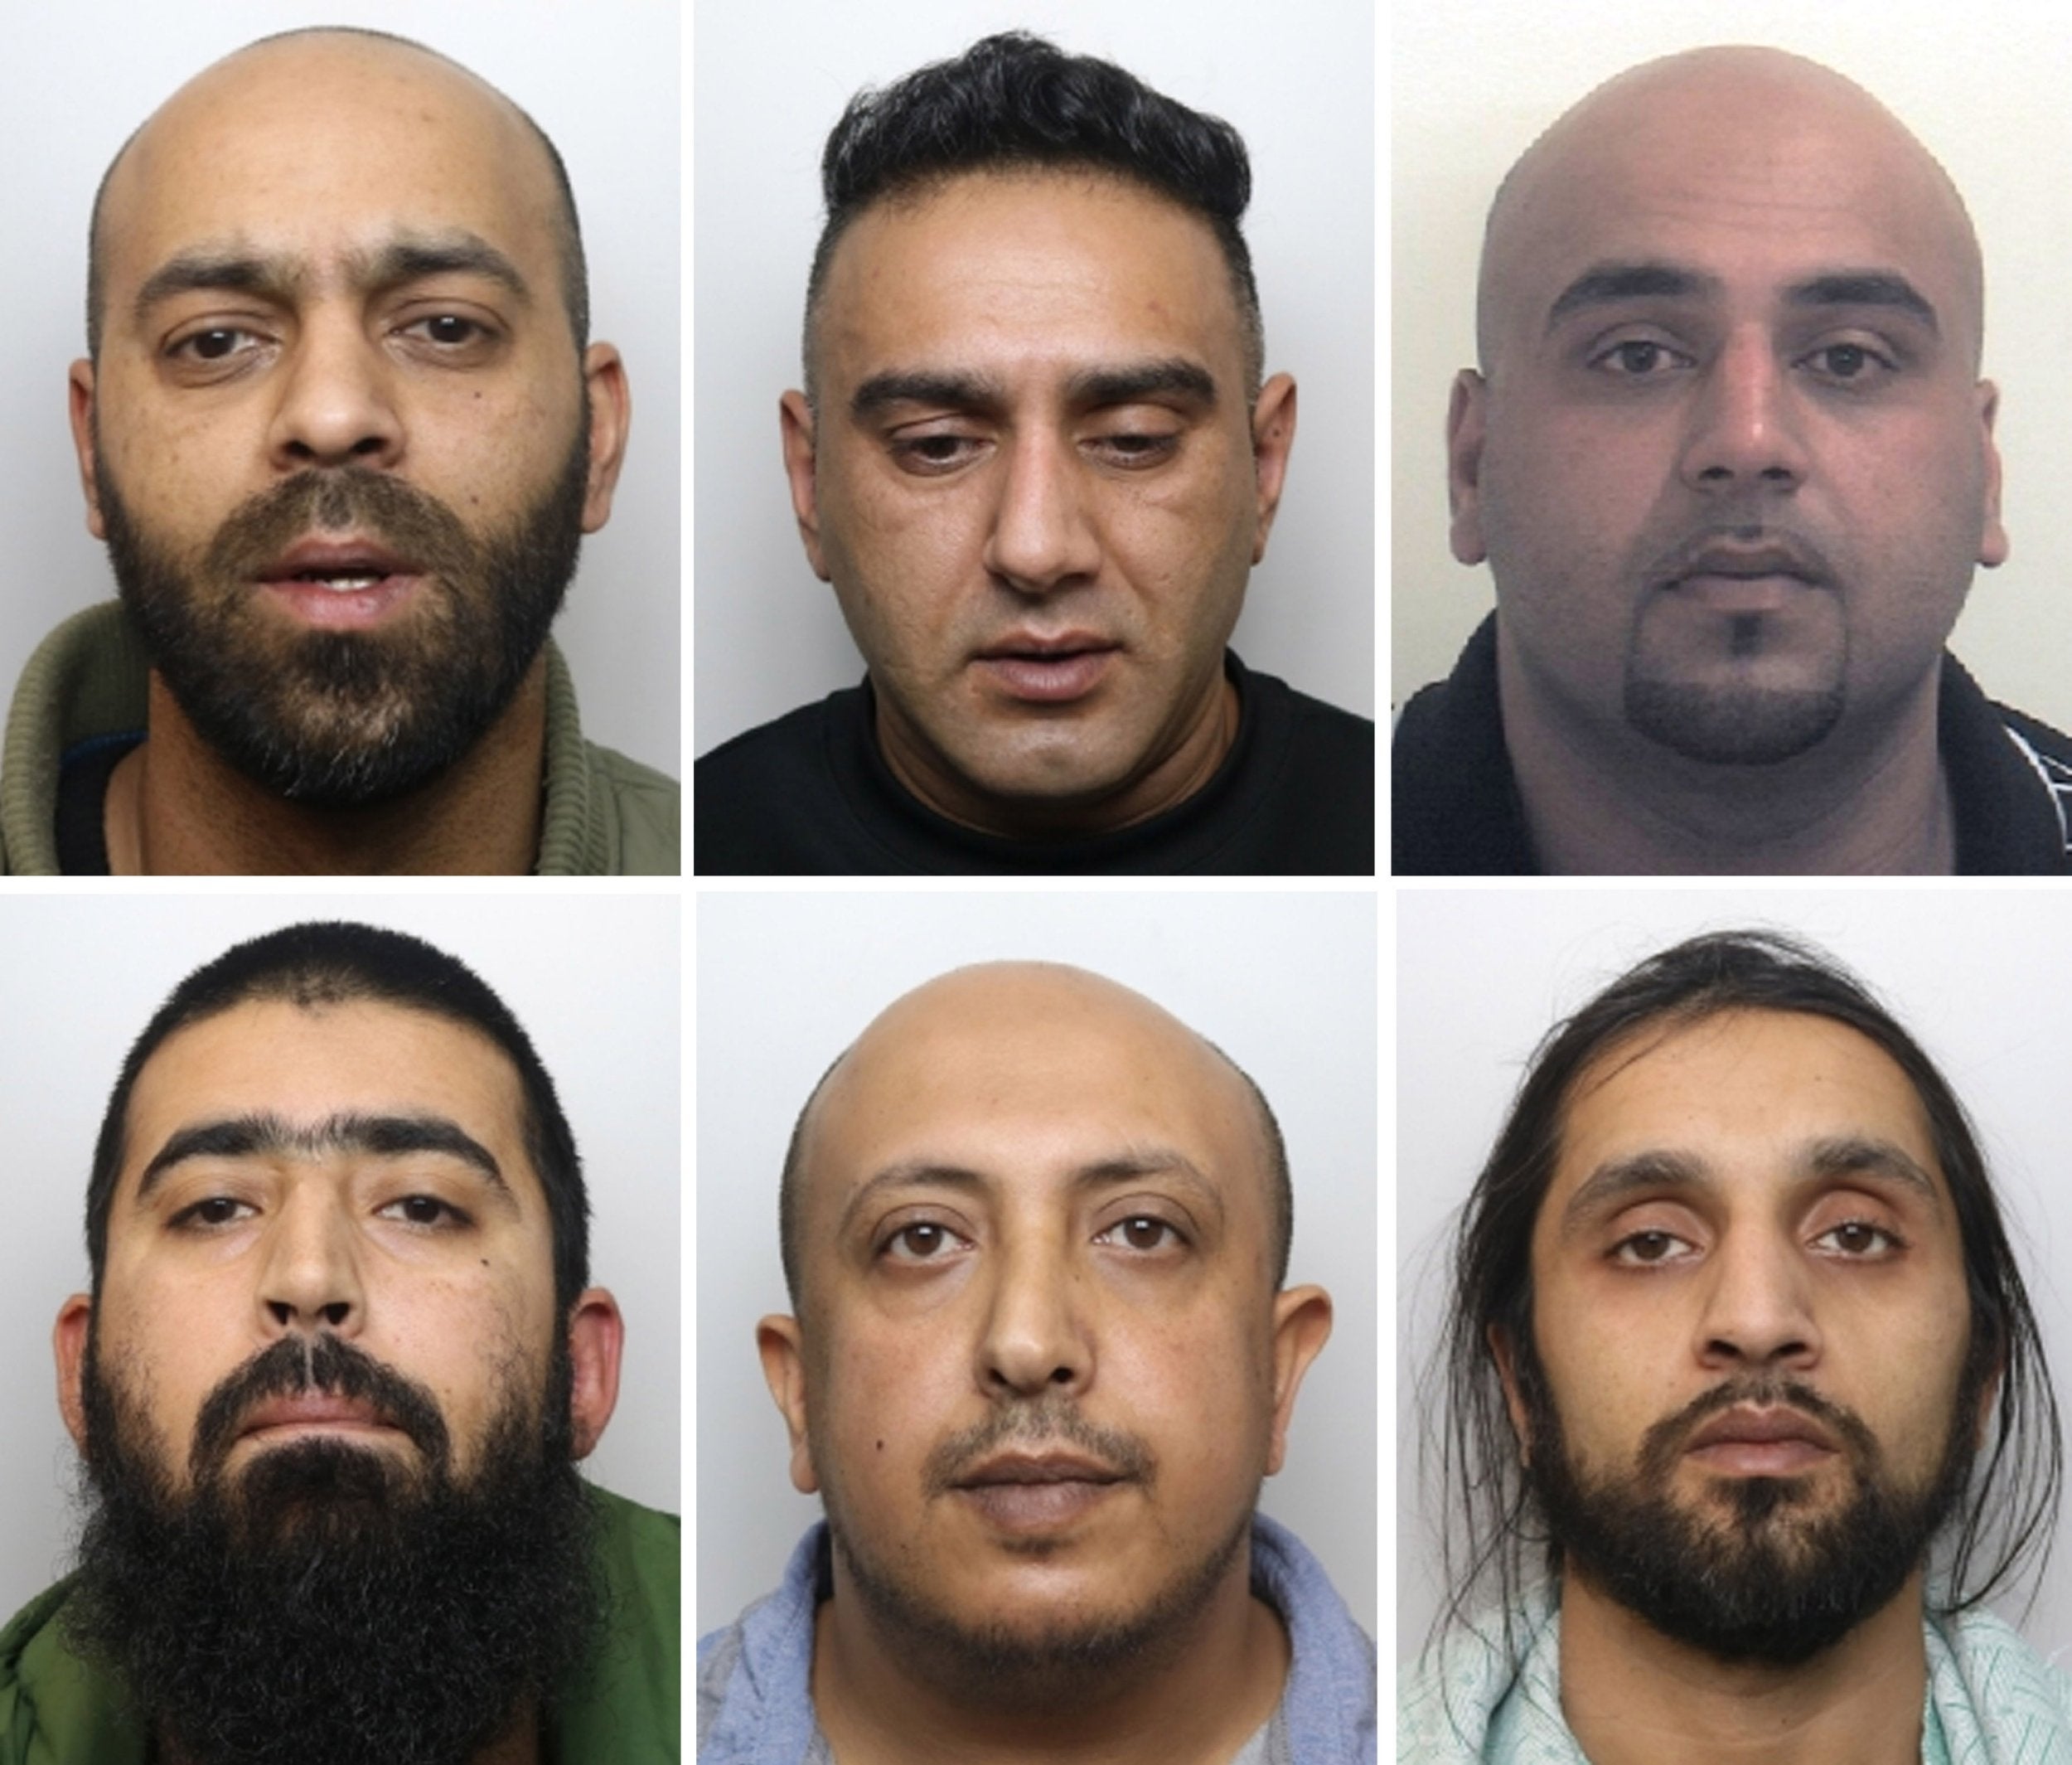 Seven men, including one who could not be identified, were convicted of offences as part of grooming gang activity in Rotherham on Monday 